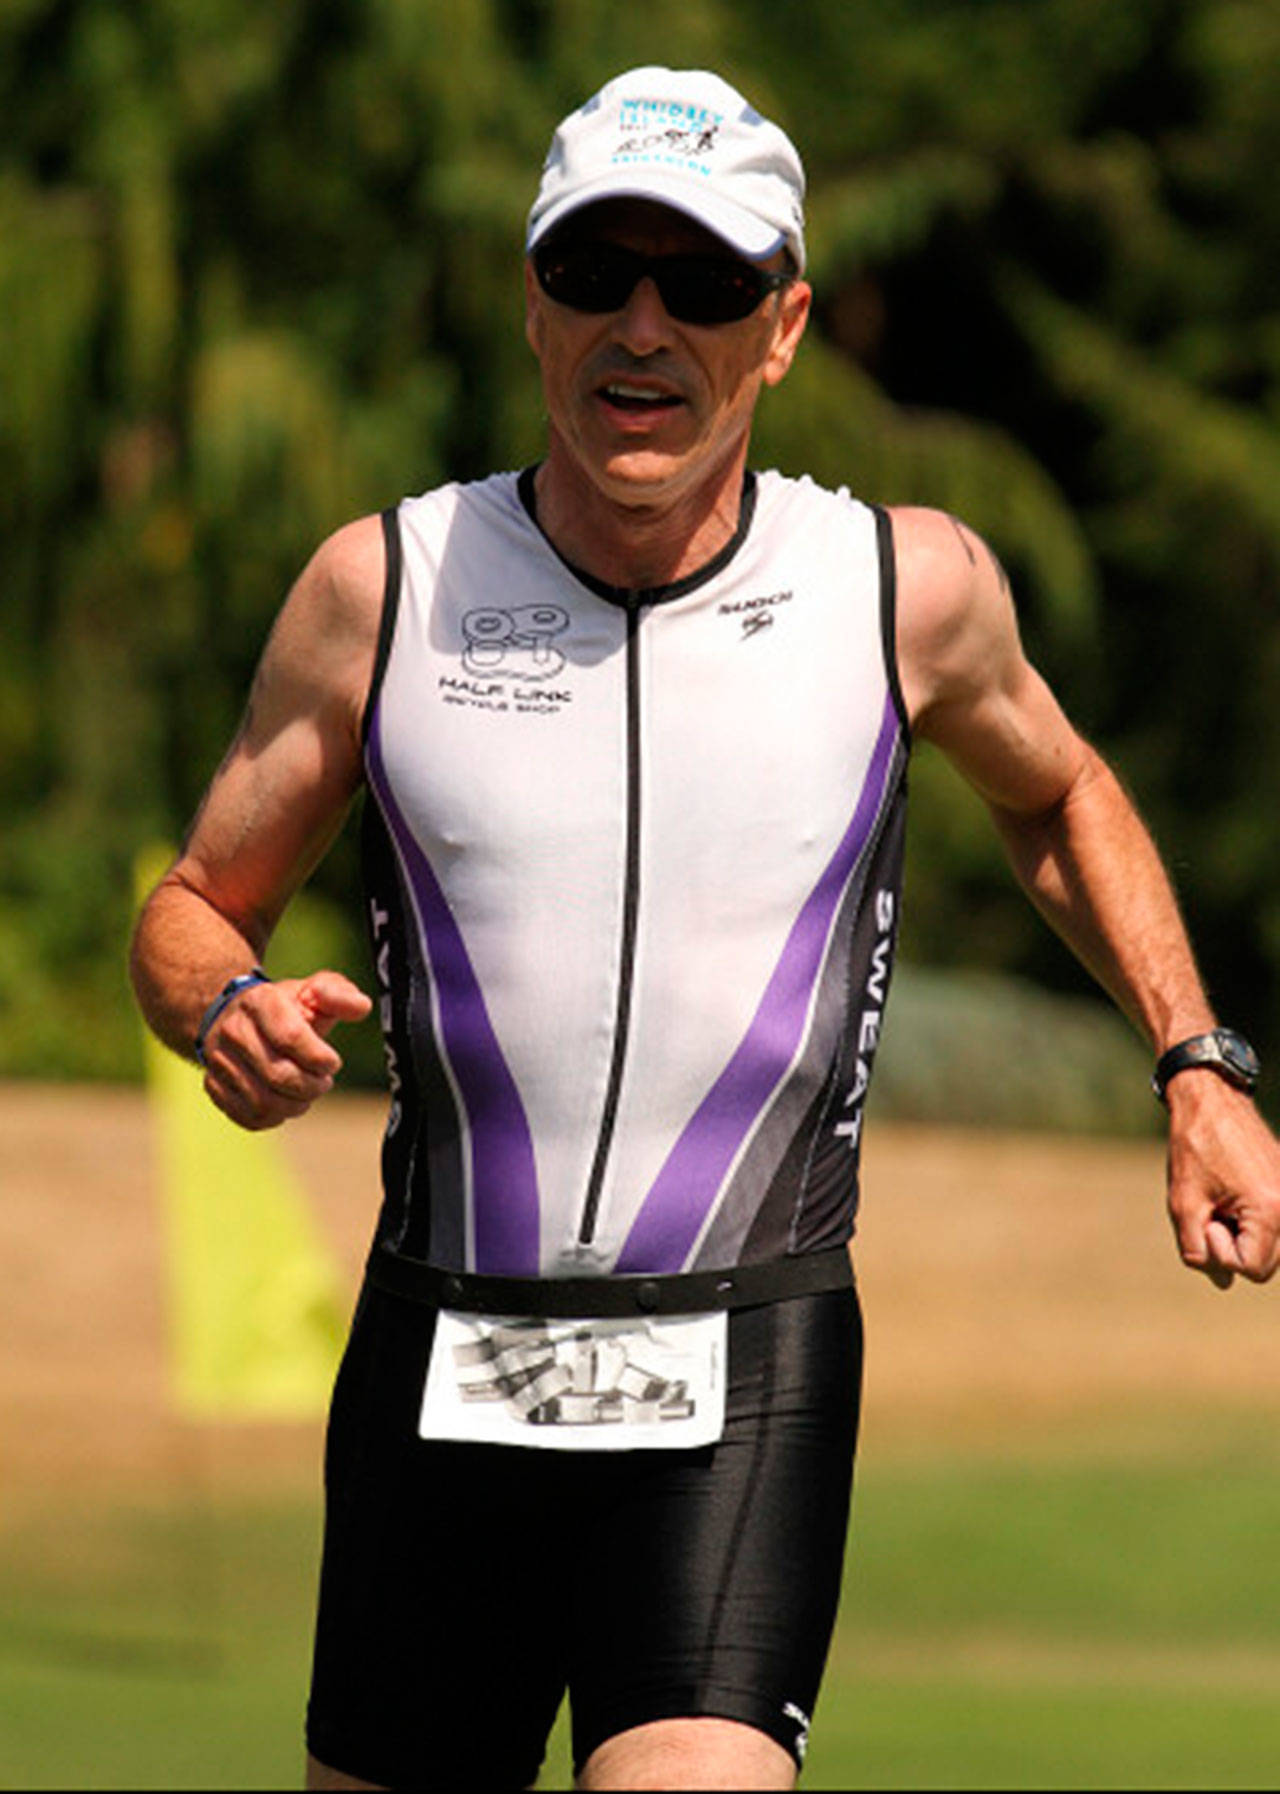 Bob Thome, shown here competing in 2016, will participate in his 20th Whidbey Island Triathlon this weekend. (Submitted photo)